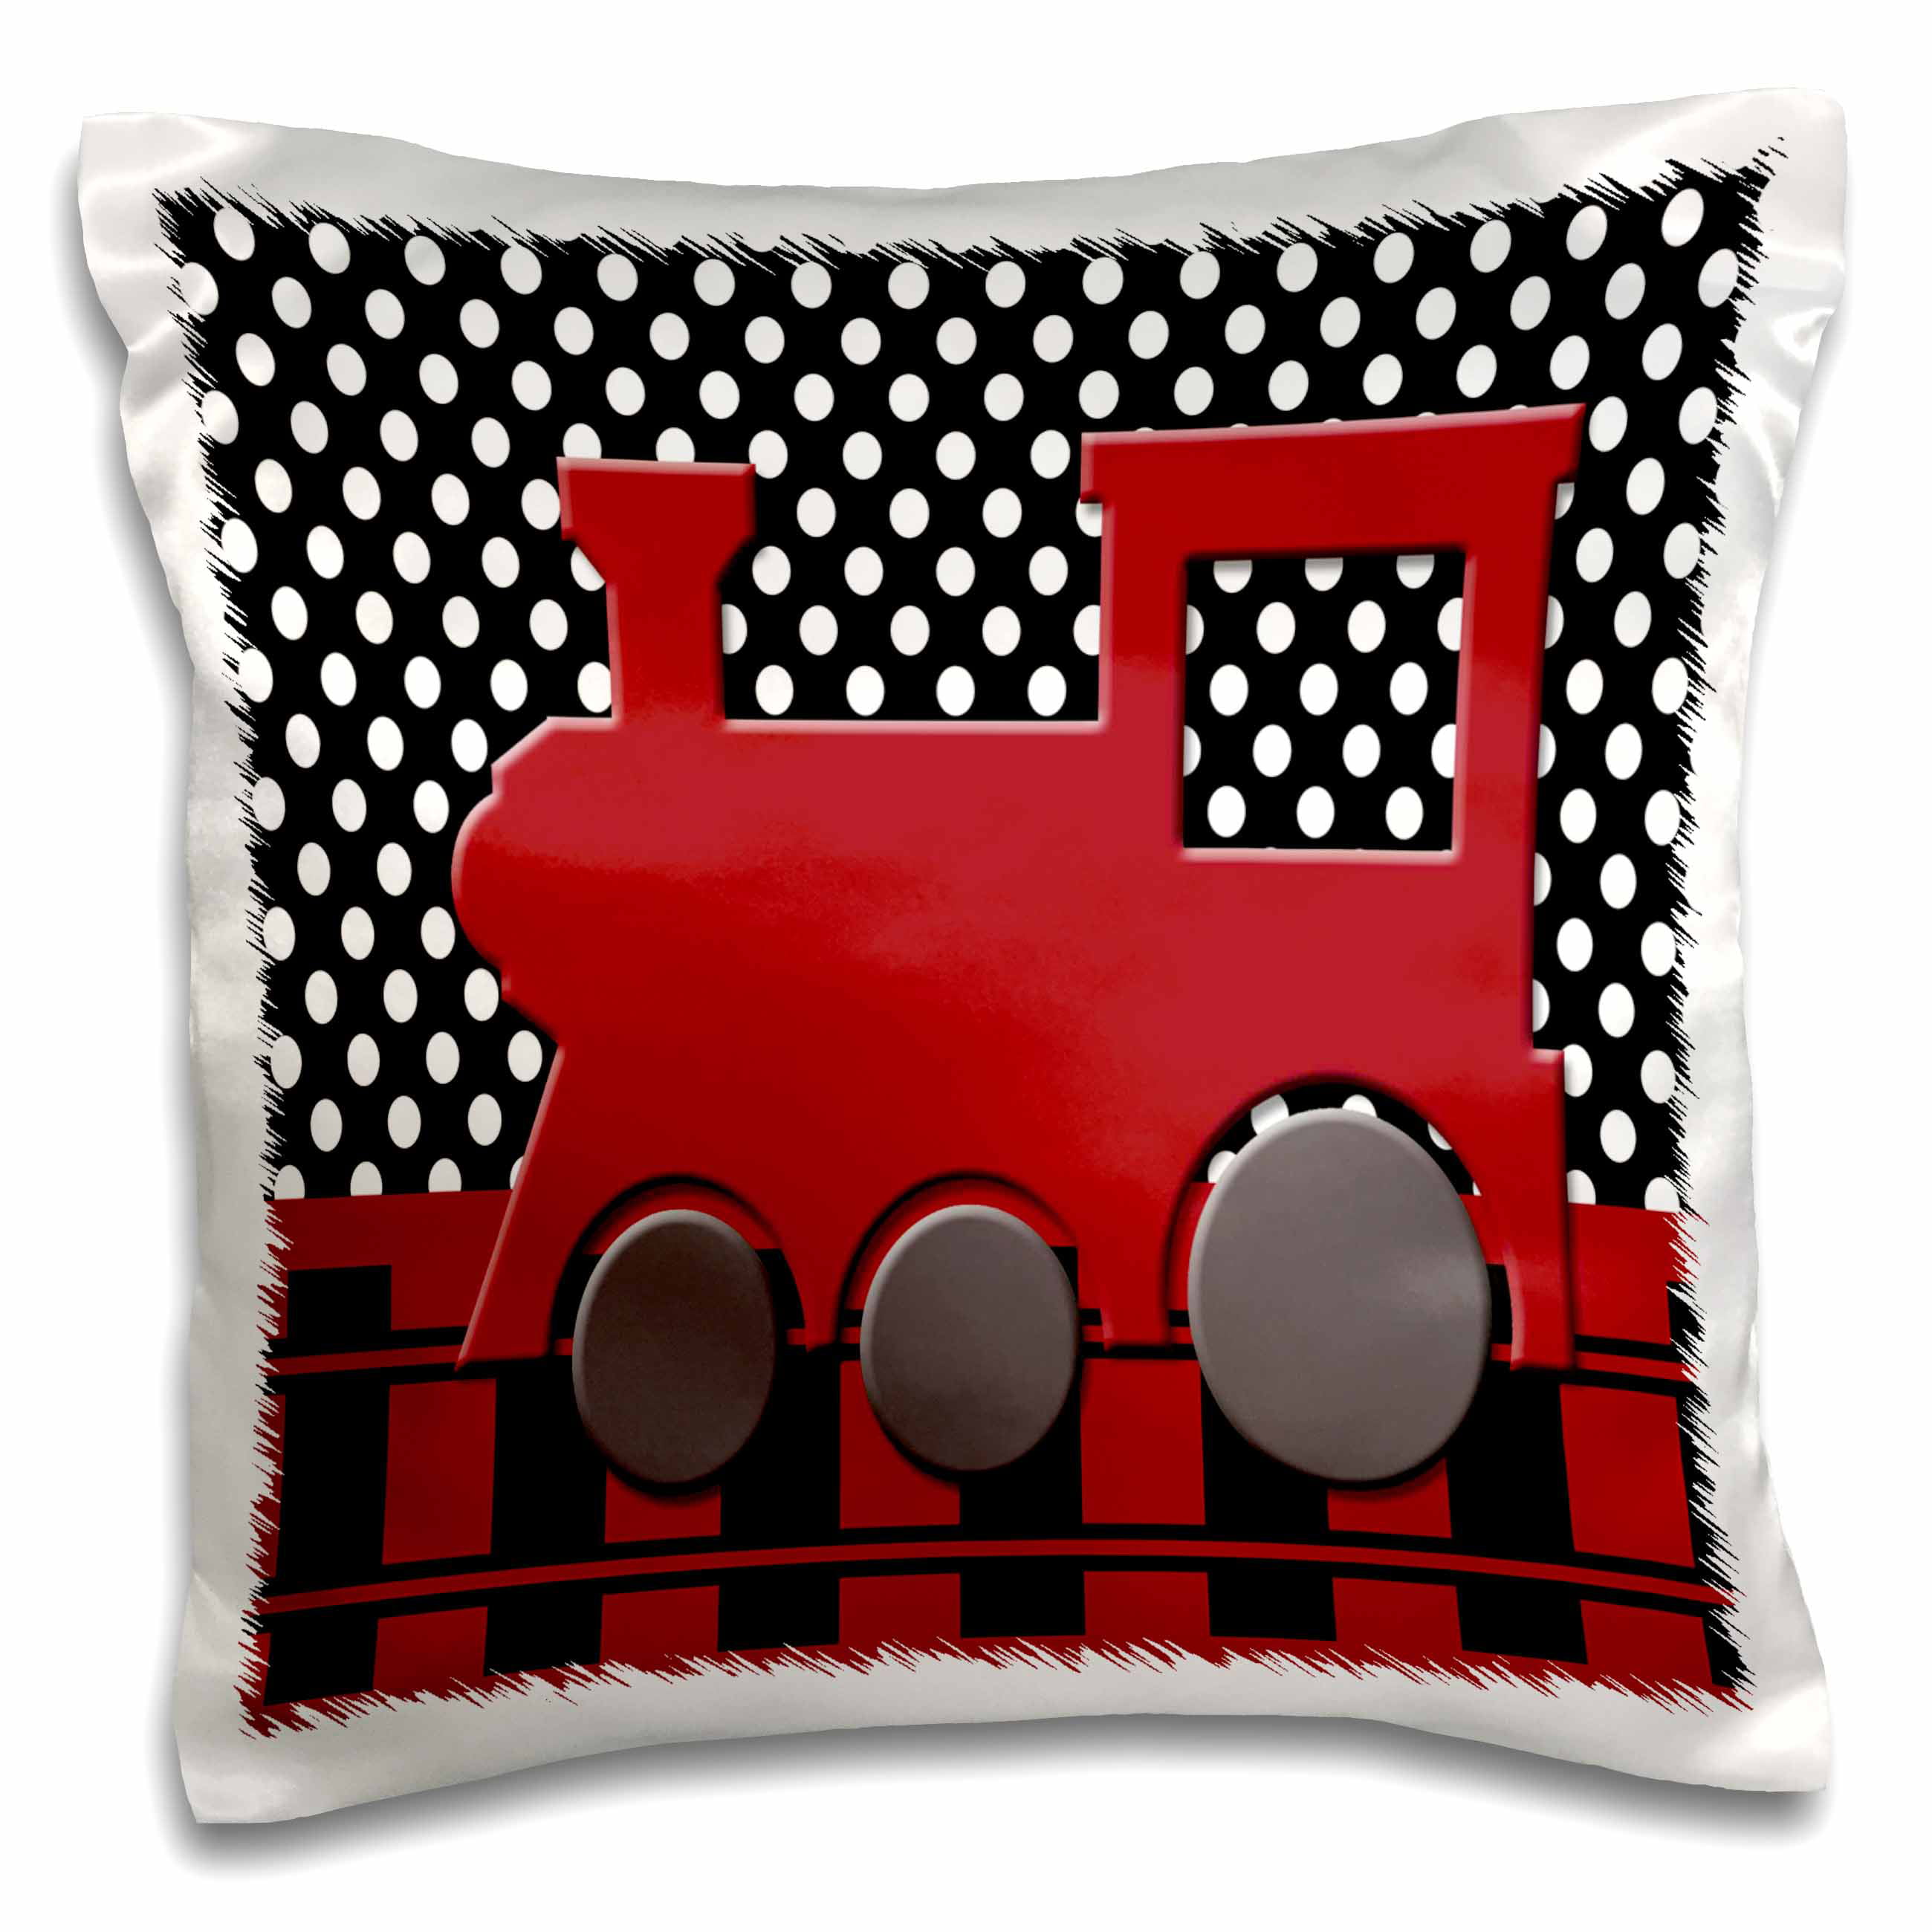 3drose Red Train Engine On A Black Polka Dot Background With Railroad Pillow Case 16 By 16 Inch